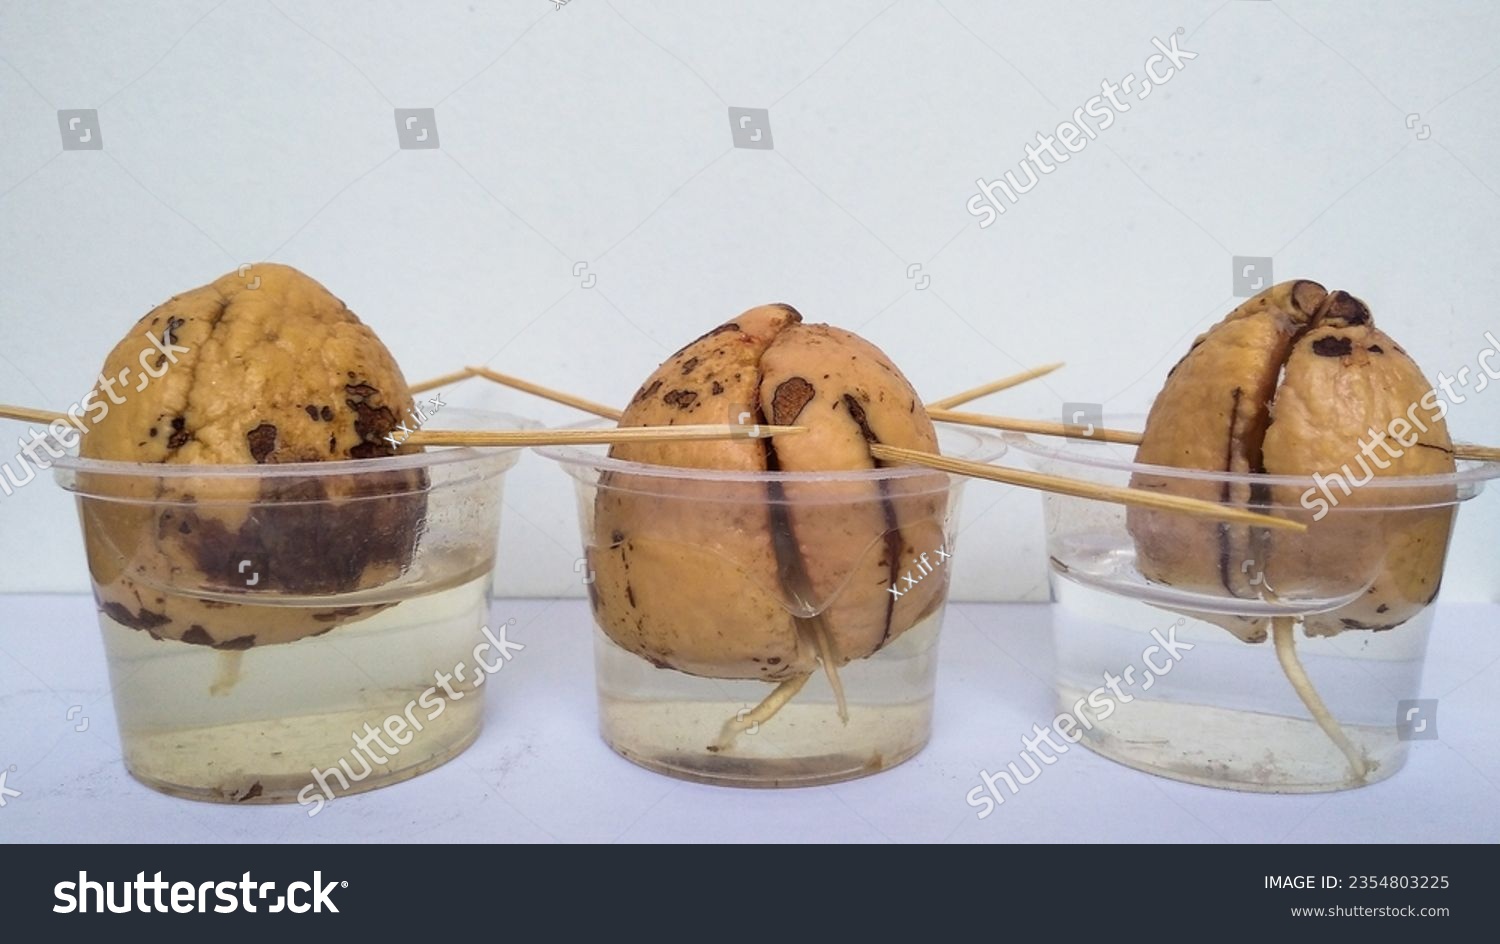 Avocado (Persea americana) seeds, planted with water medium and toothpick to grow shoots at home #2354803225